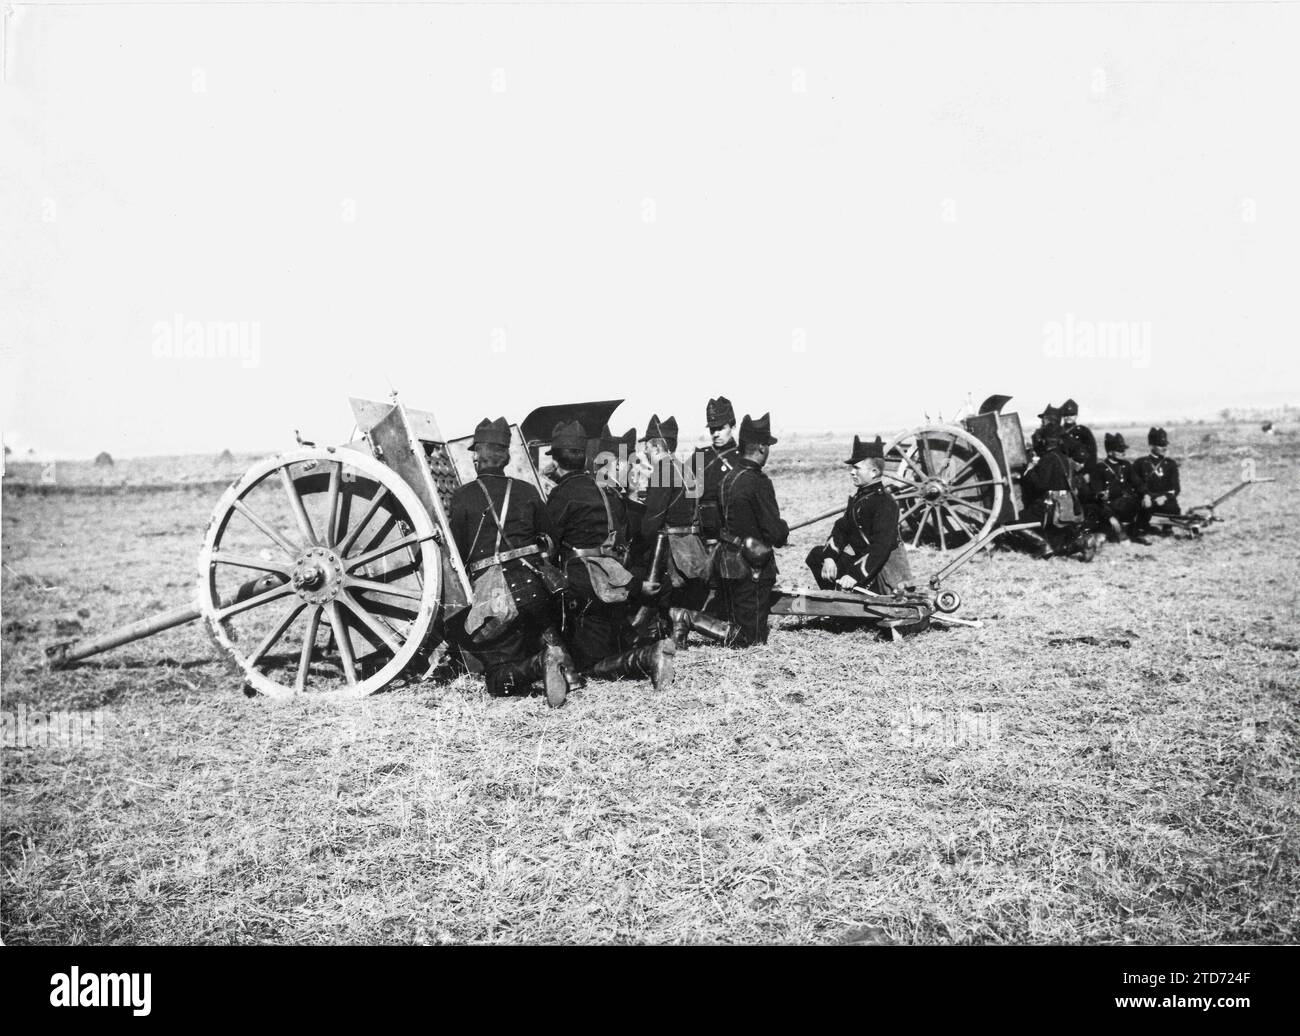 07/31/1916. From Another Belligerent Nation. Romanian army artillery soldiers exercising in the use of rapid-fire cannons. Credit: Album / Archivo ABC / Charles Chusseau Flaviens Stock Photo